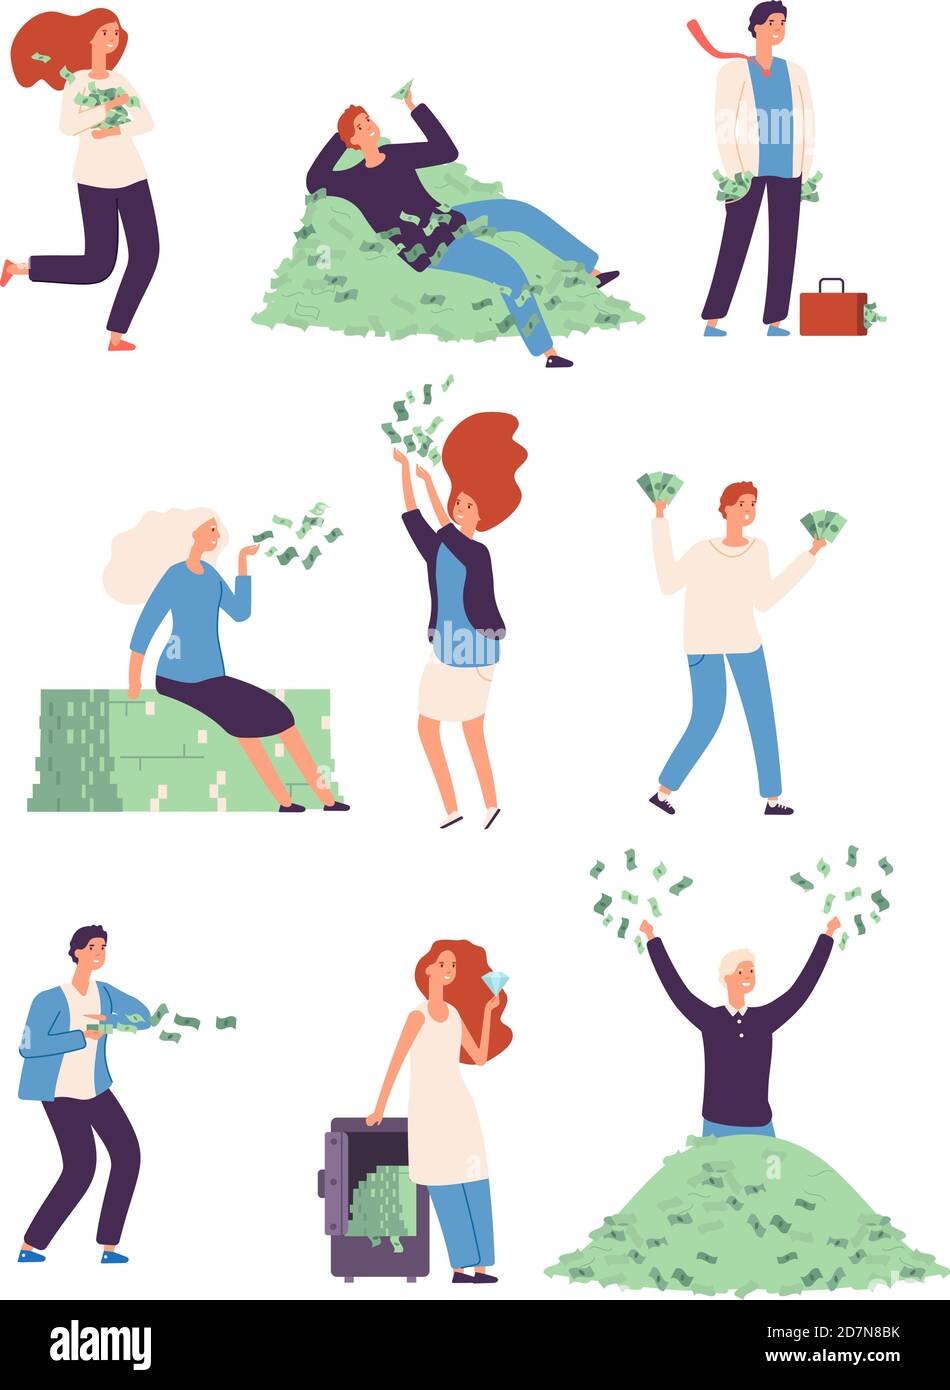 Rich people. Wealthy happy persons with money, lucky rich man and woman millionaire vector isolated characters. Illustration of people successful and rich, wealthy businessman Stock Vector